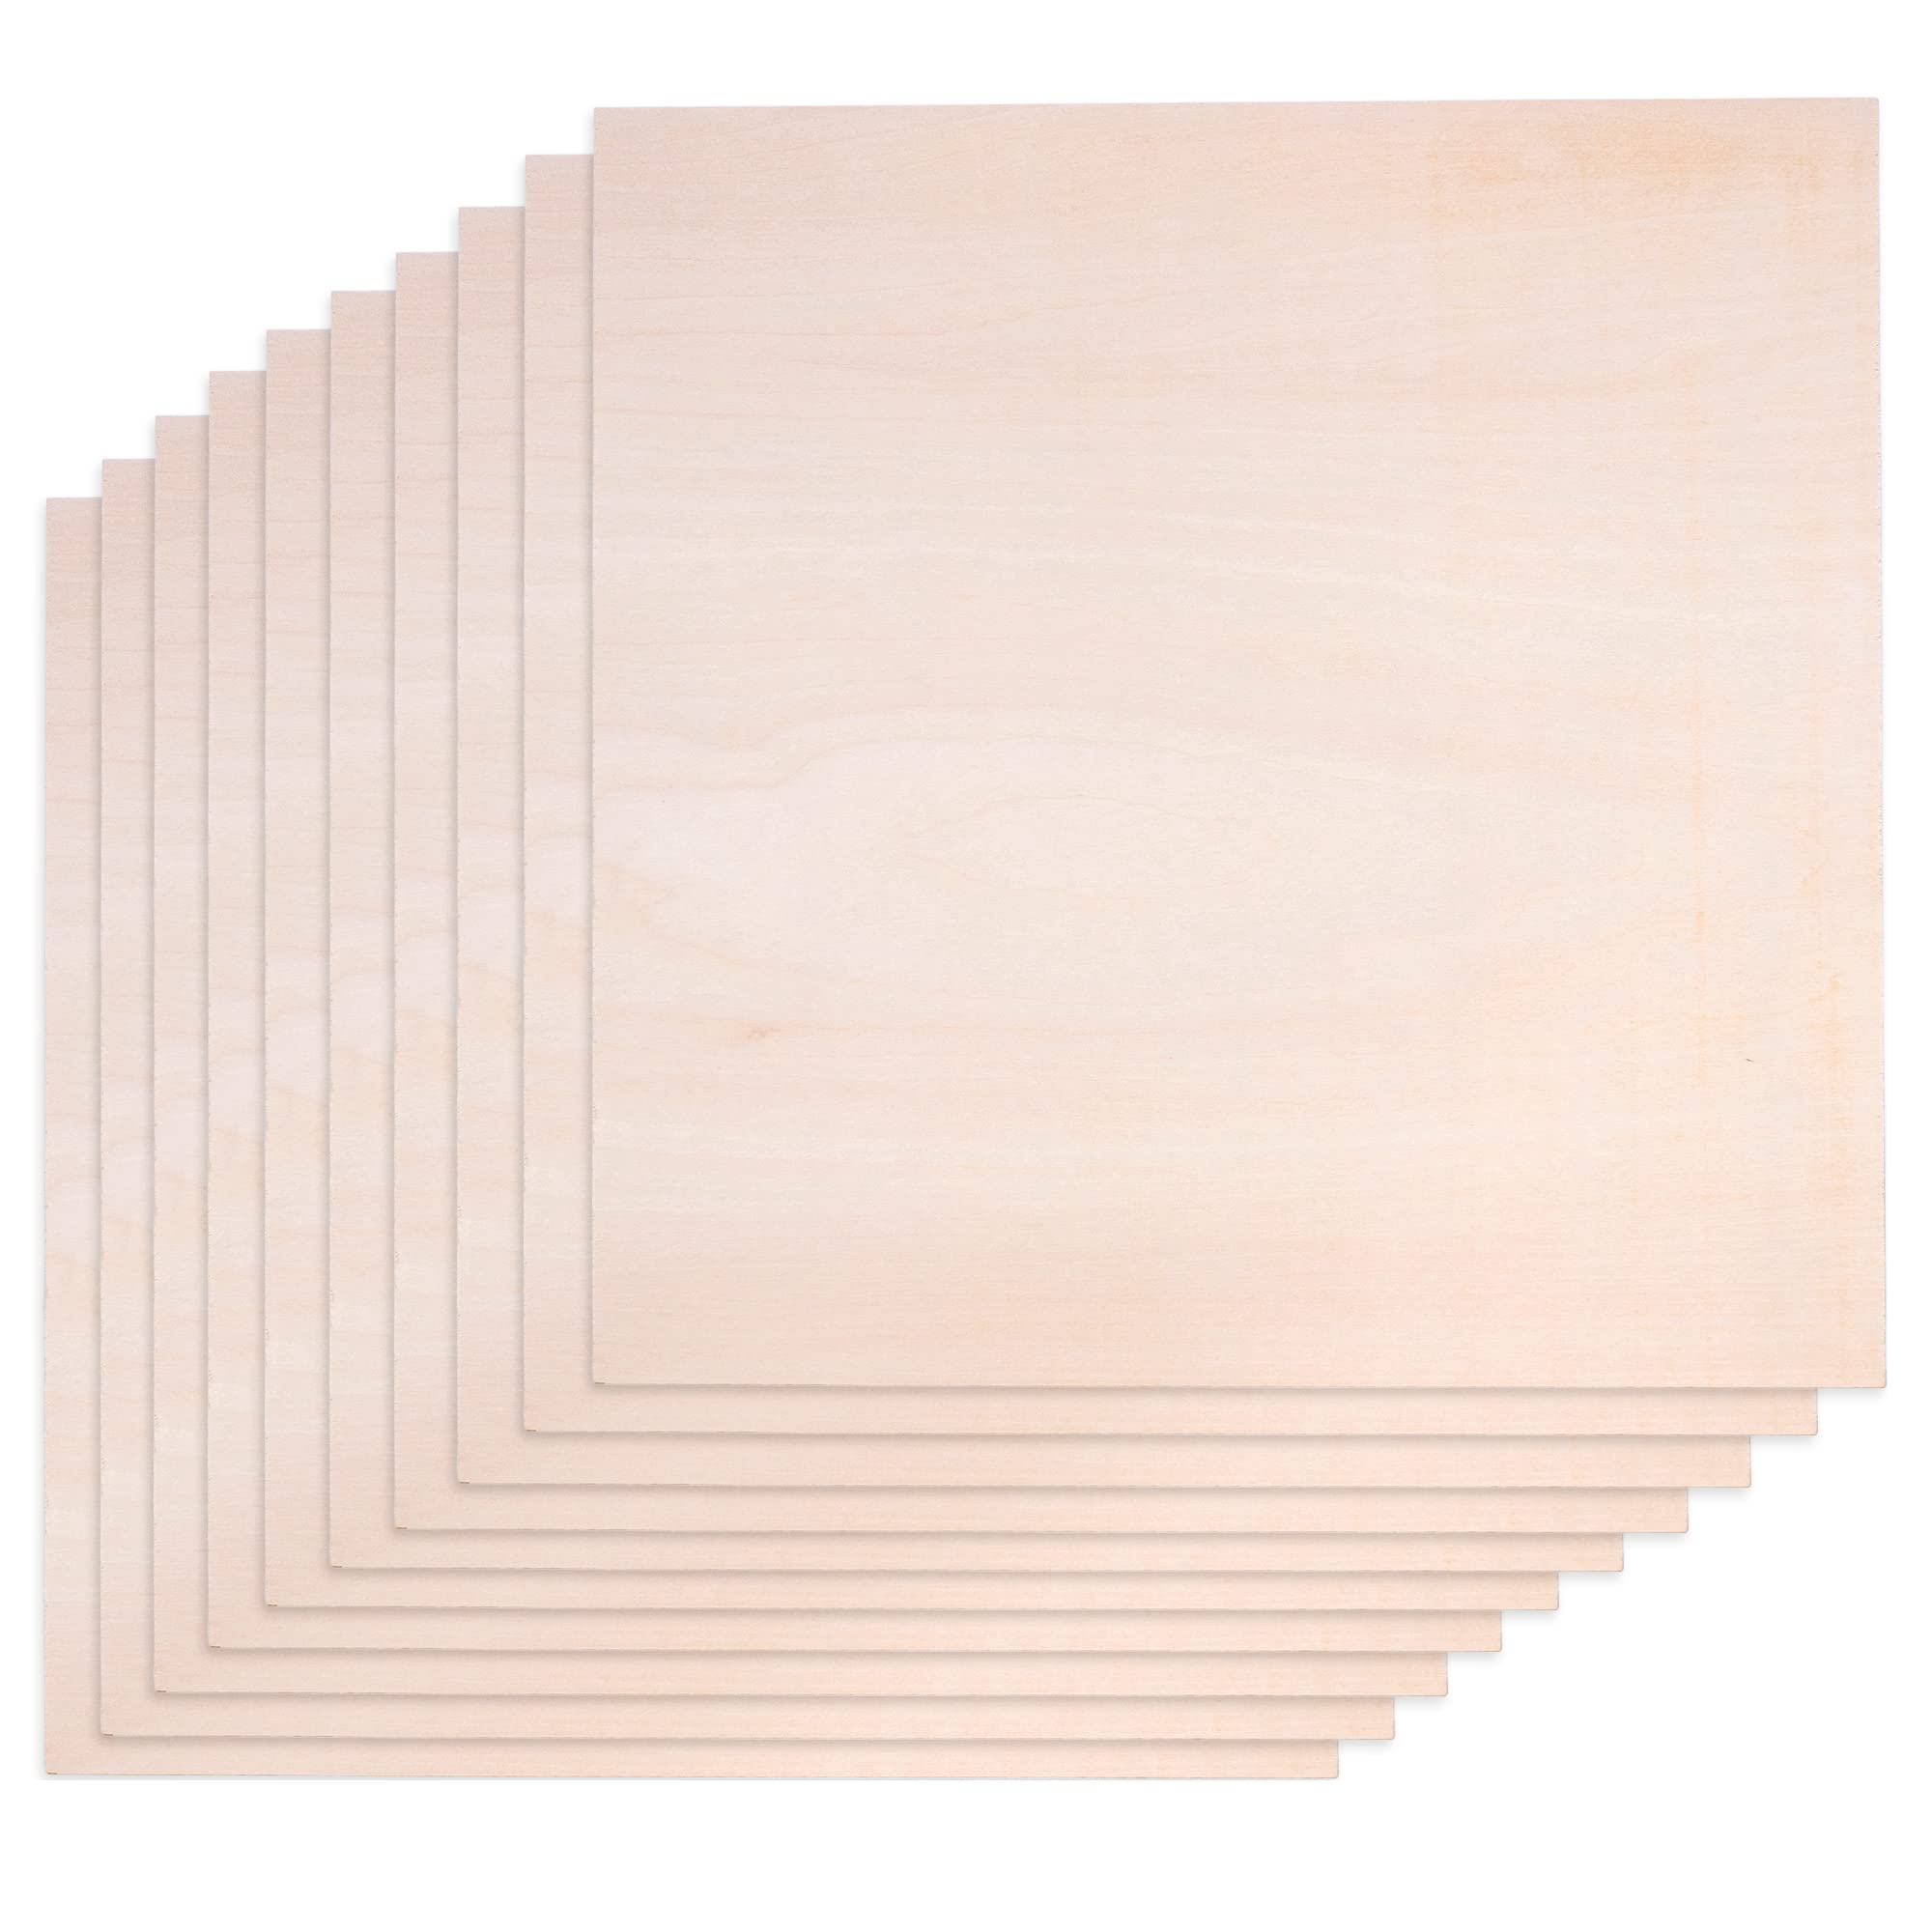 BASSWOOD SHEETS